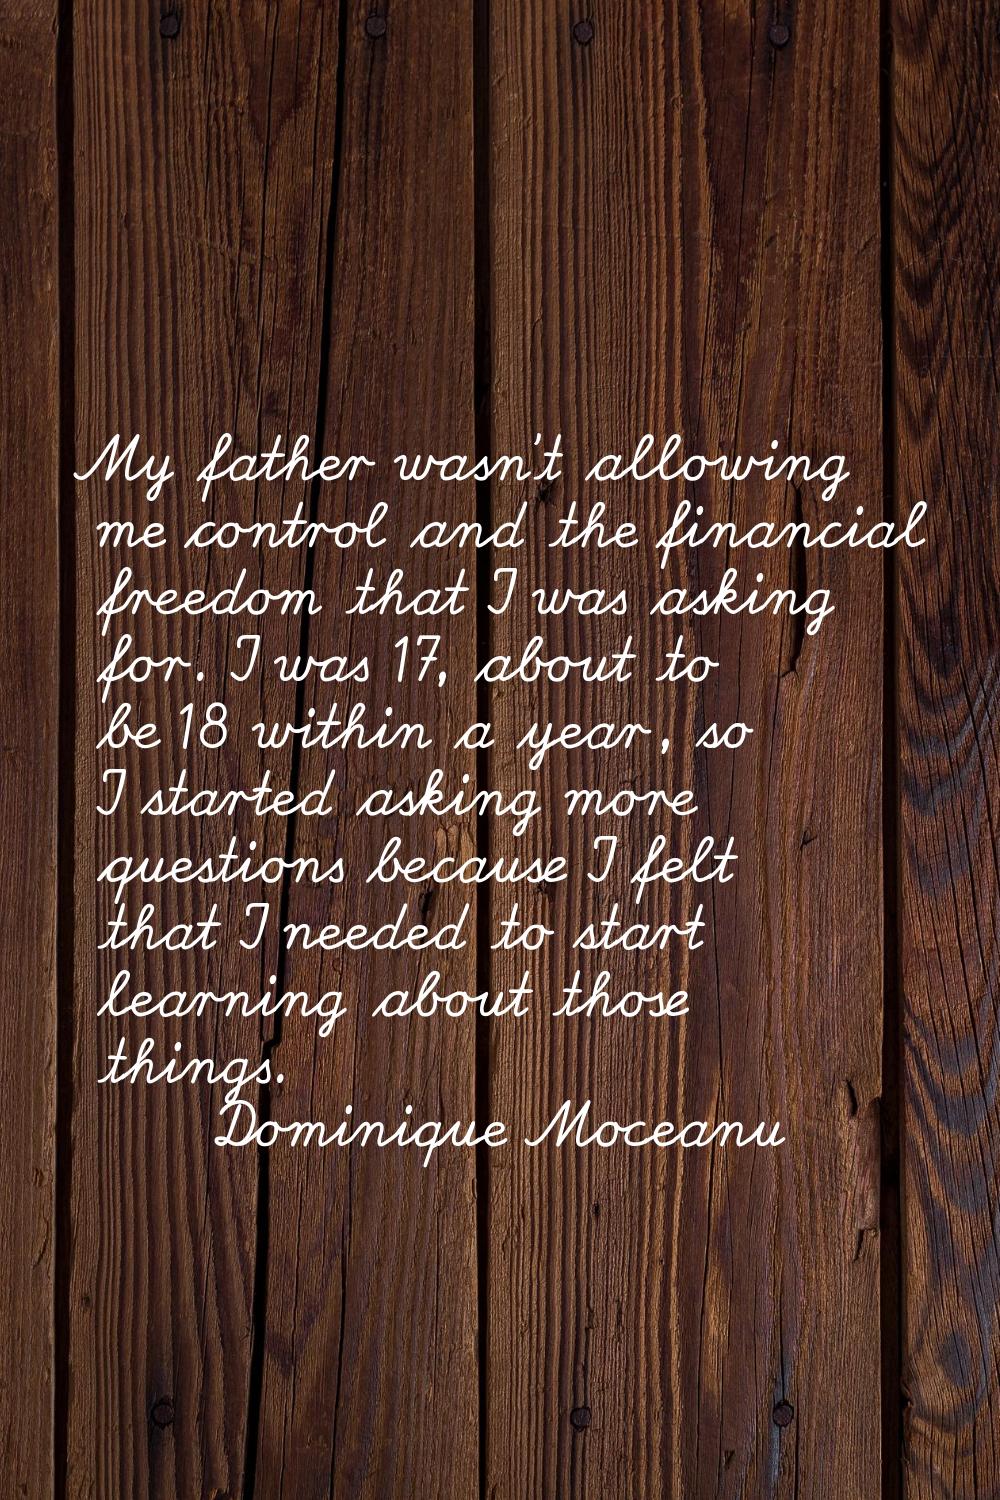 My father wasn't allowing me control and the financial freedom that I was asking for. I was 17, abo